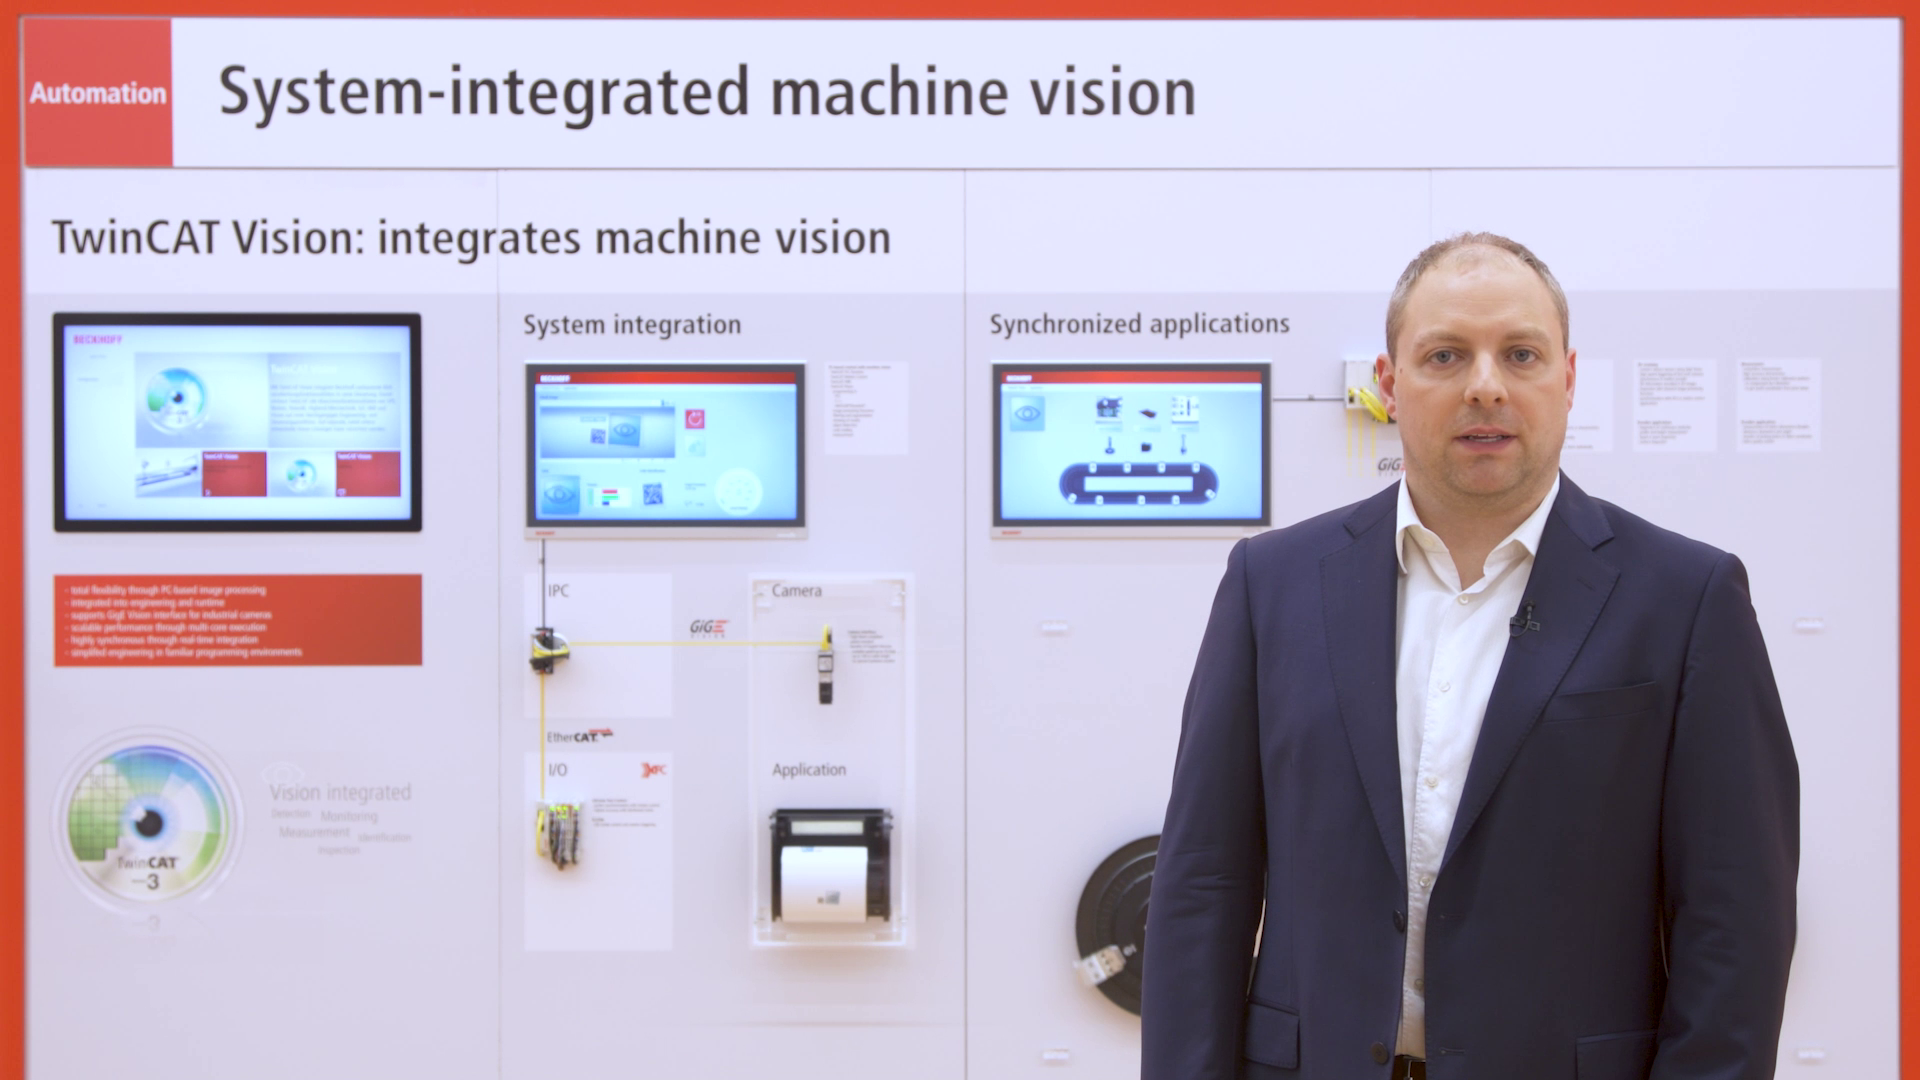 New functions, Vision-specific HMI controls, and image integration in Scope 